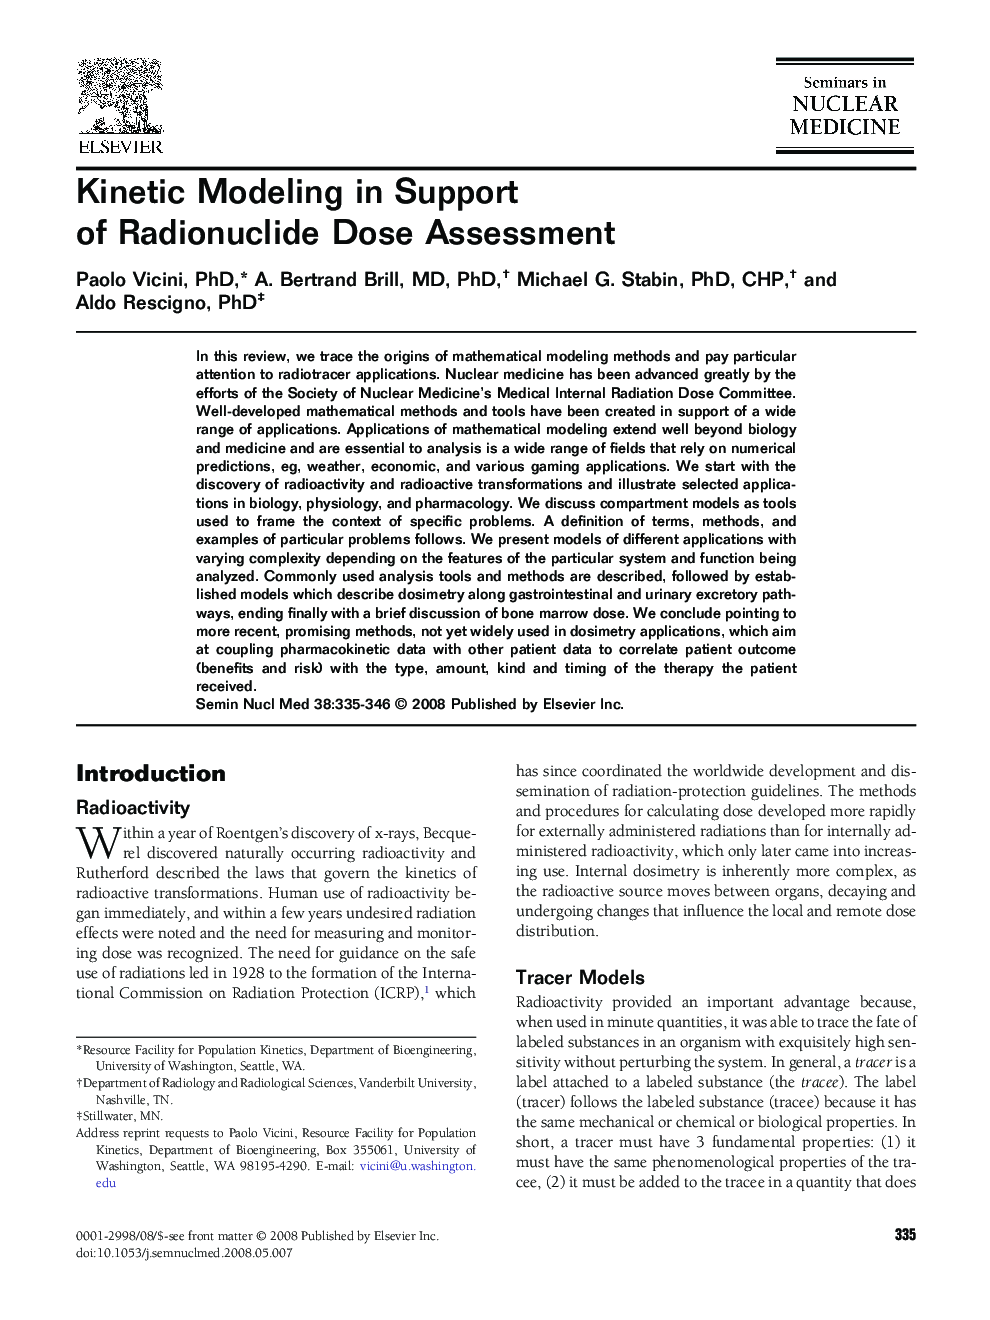 Kinetic Modeling in Support of Radionuclide Dose Assessment